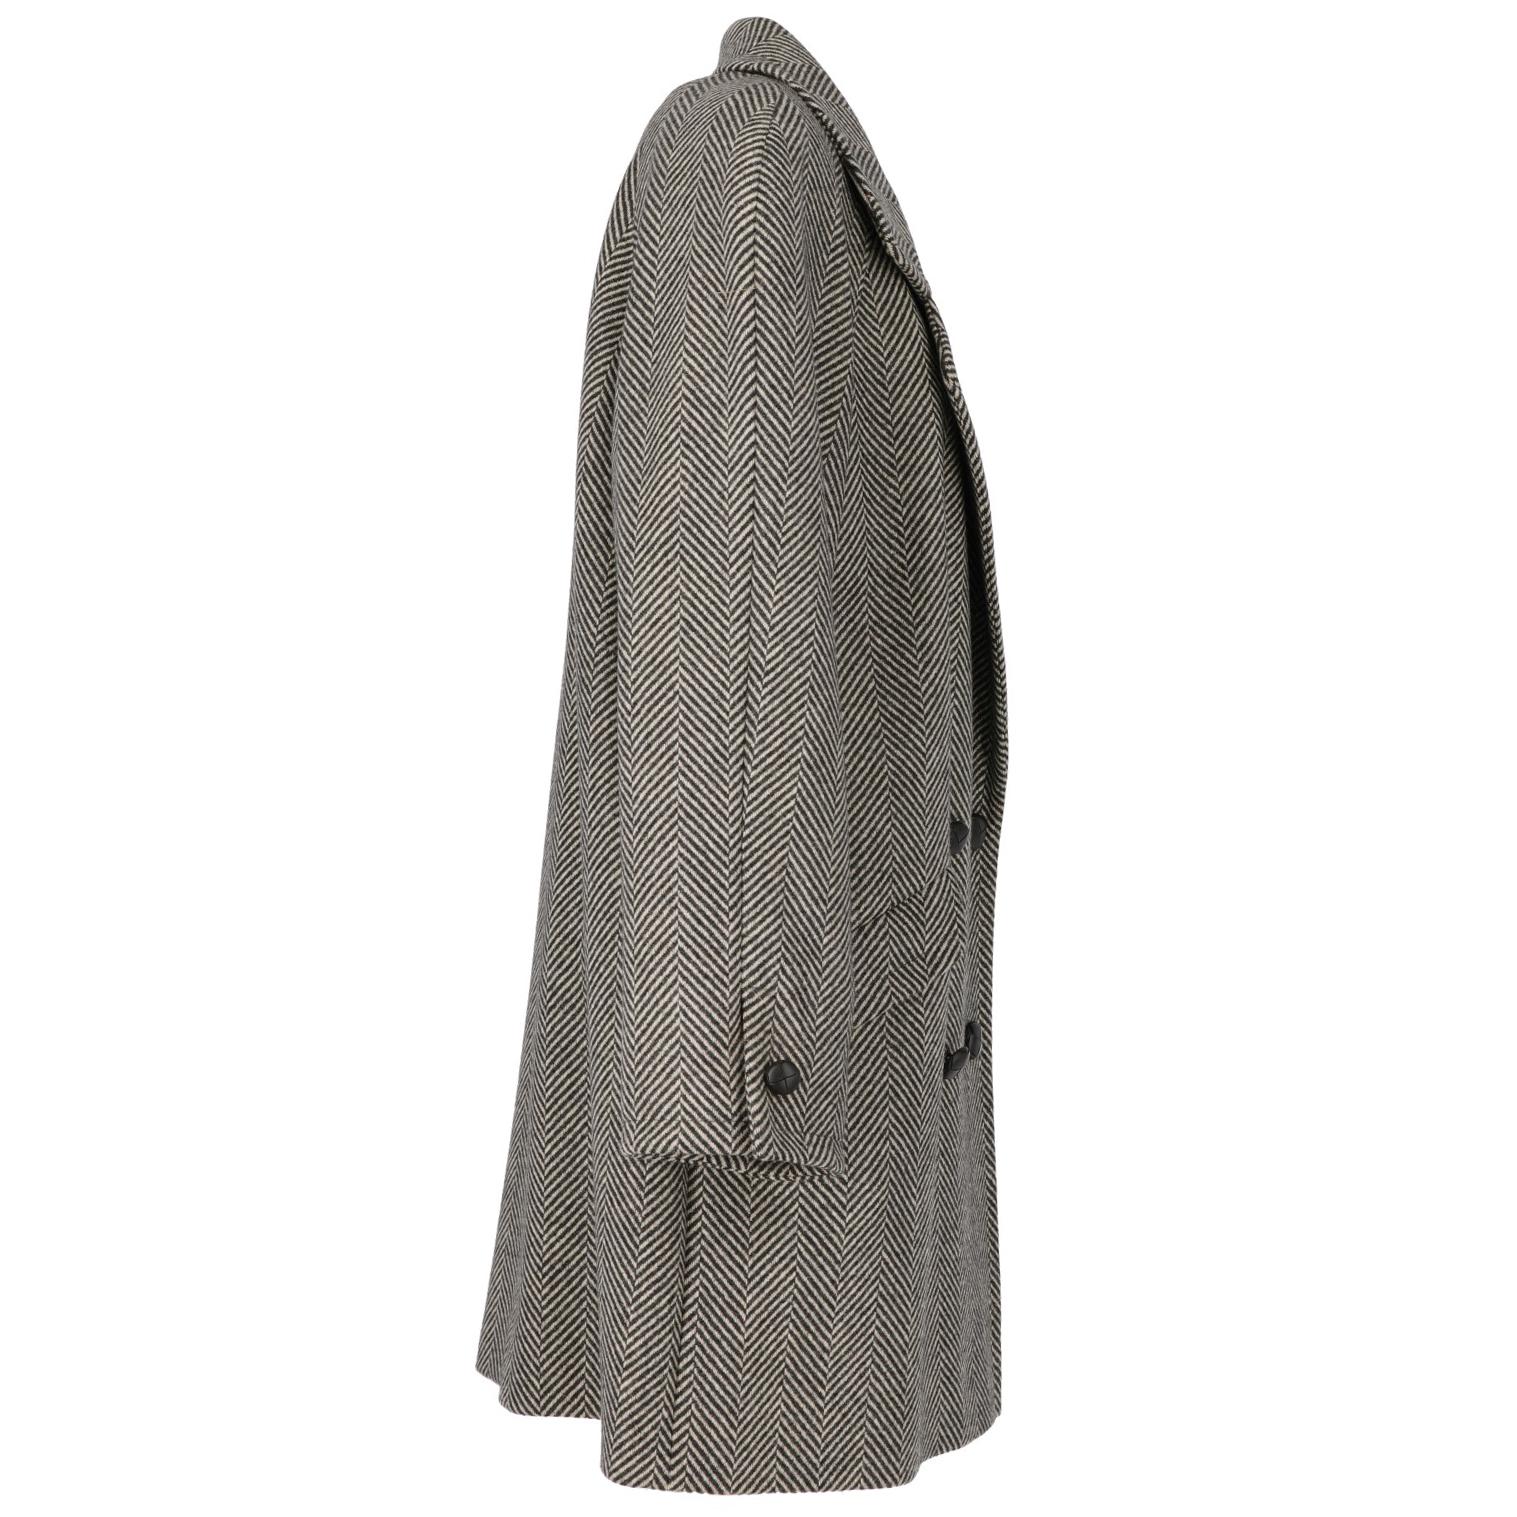 The Aquascutum herringbone grey oversize double-breasted wool coat features two front flap pockets, large raglan sleeves and the elegant classic revers collar.
The item is new. There is the original label and the extra button.
Years: 1980s

Made in